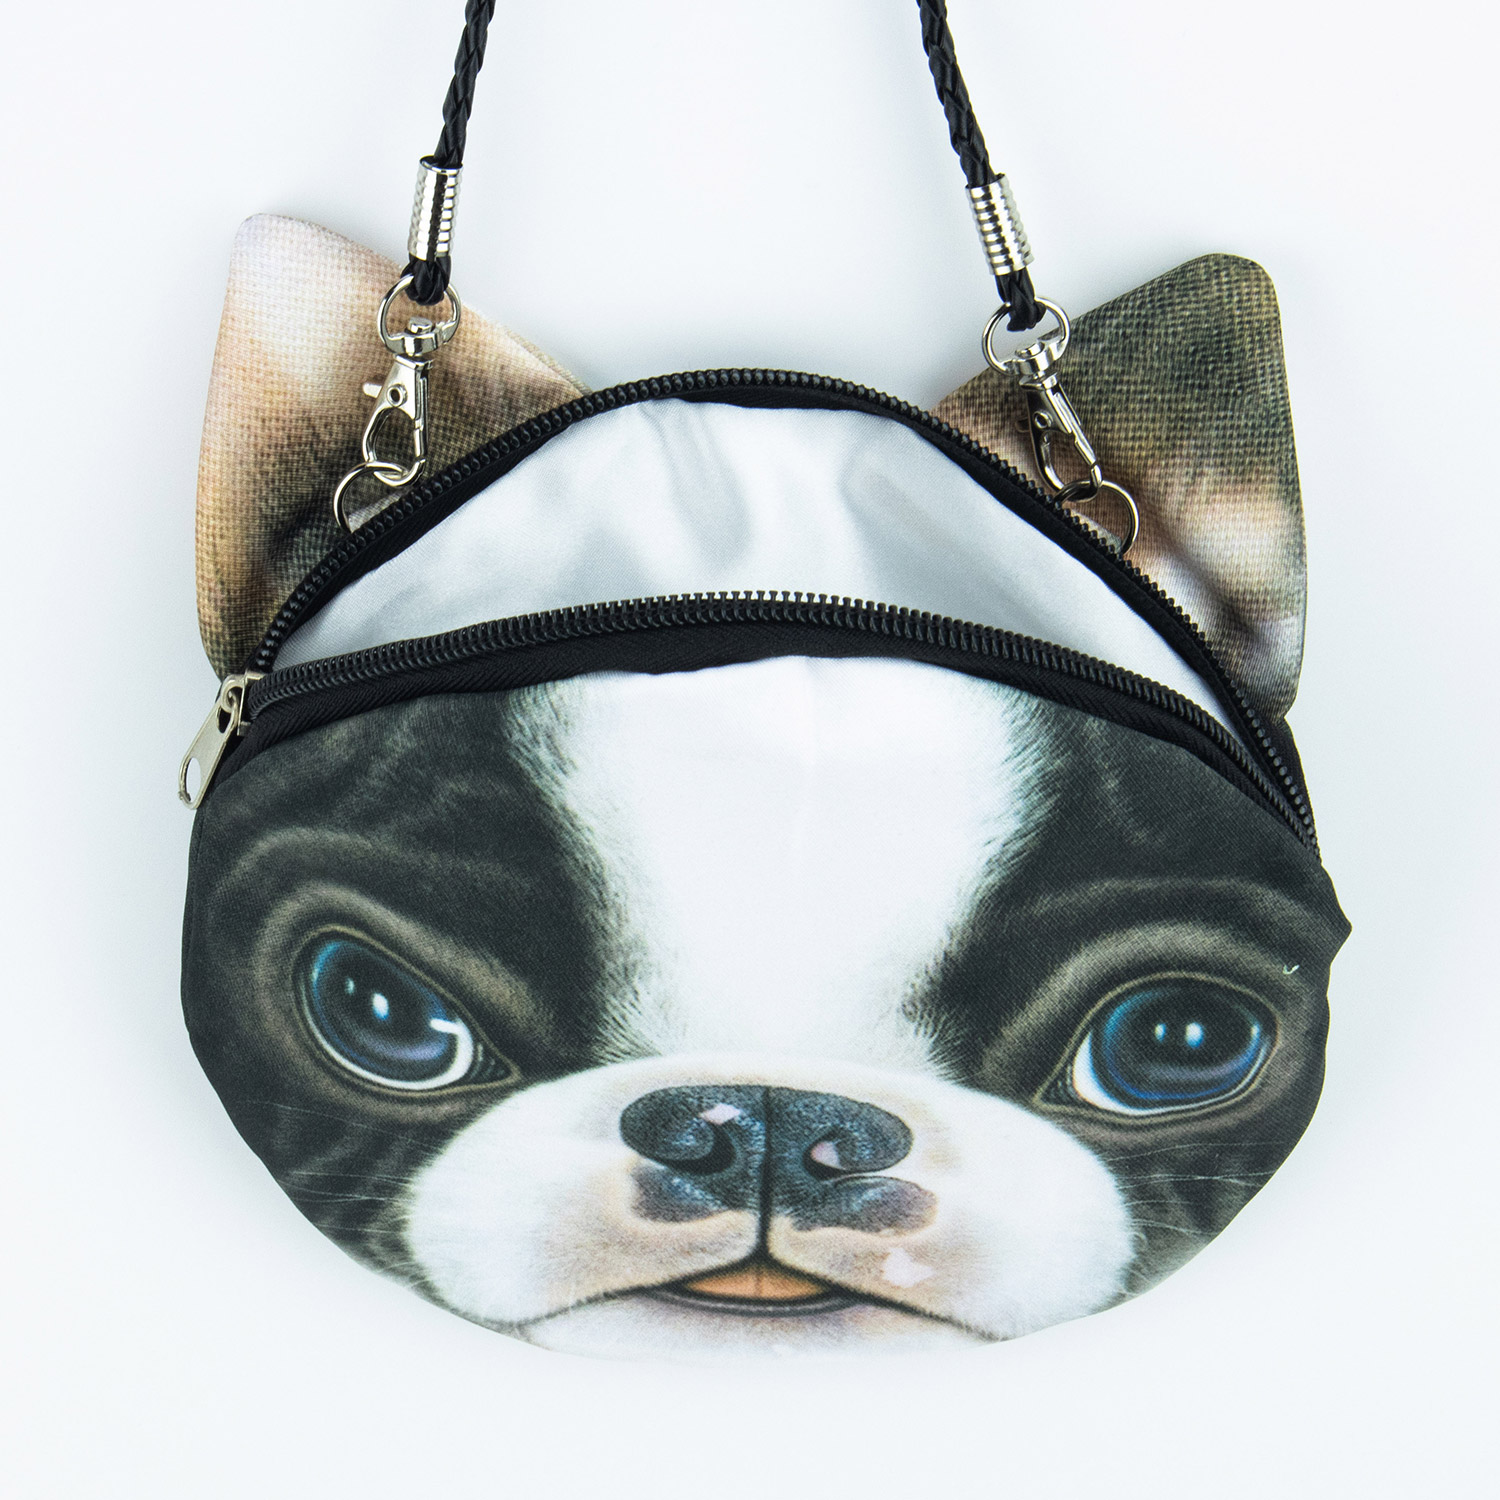 Boston Purse (Large) - Puppy Party